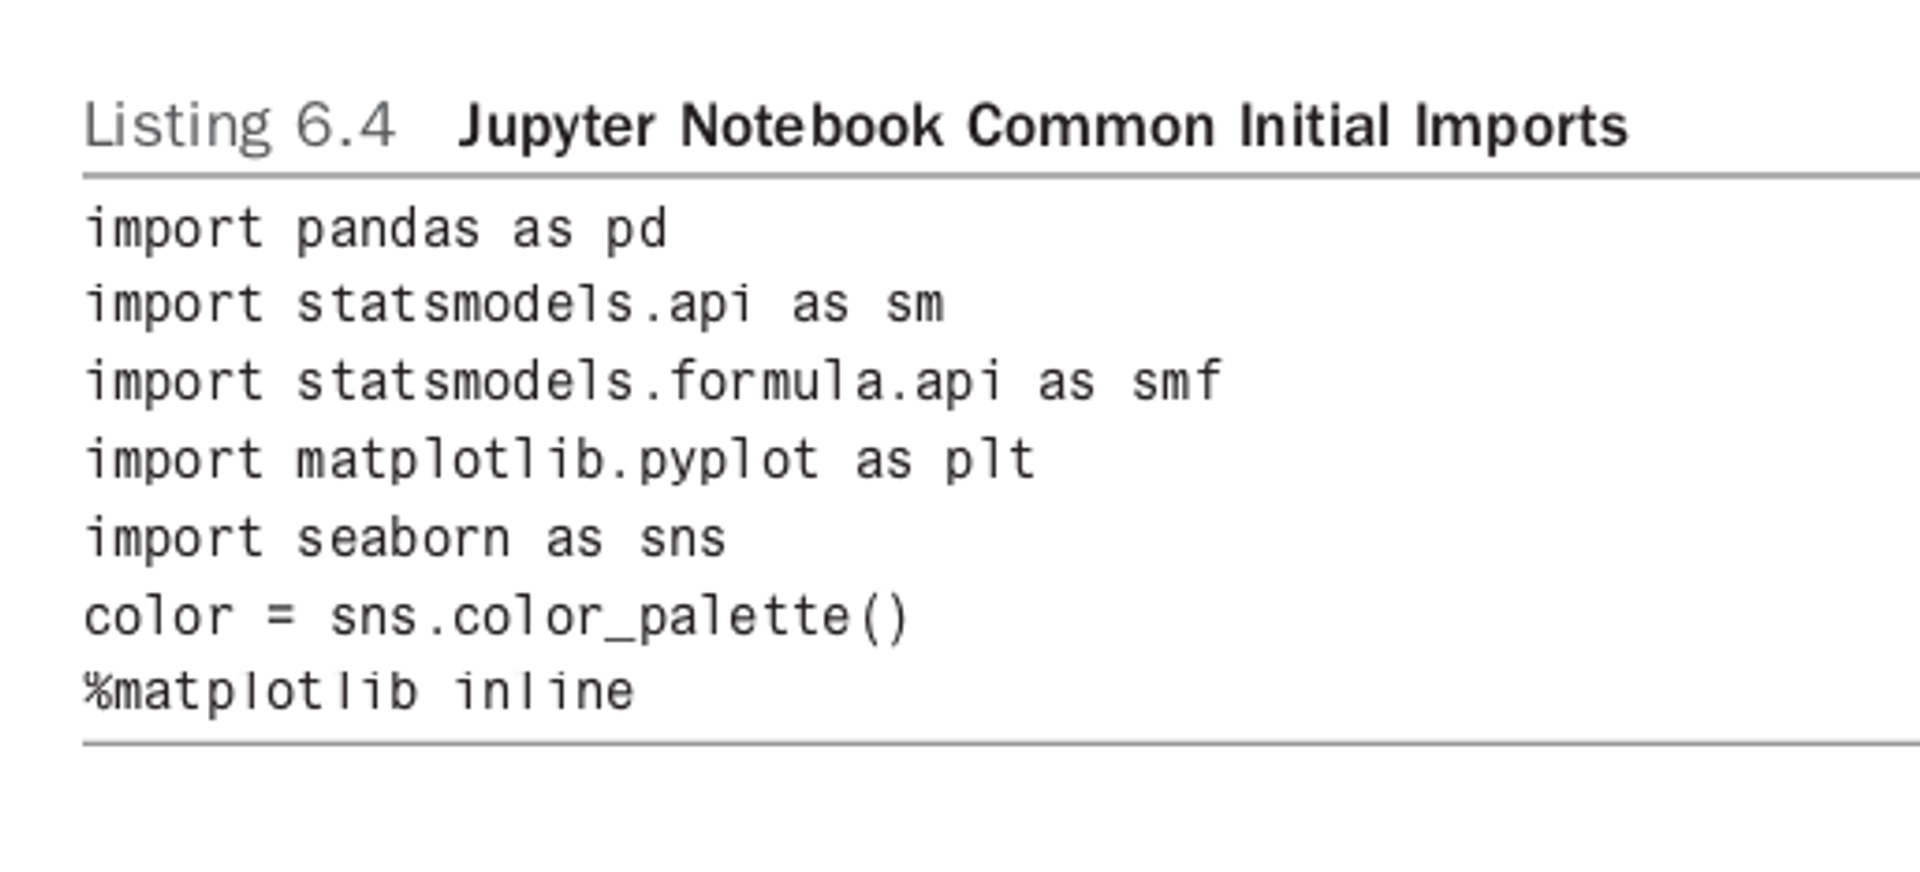 Jupyter notebook common initial imports